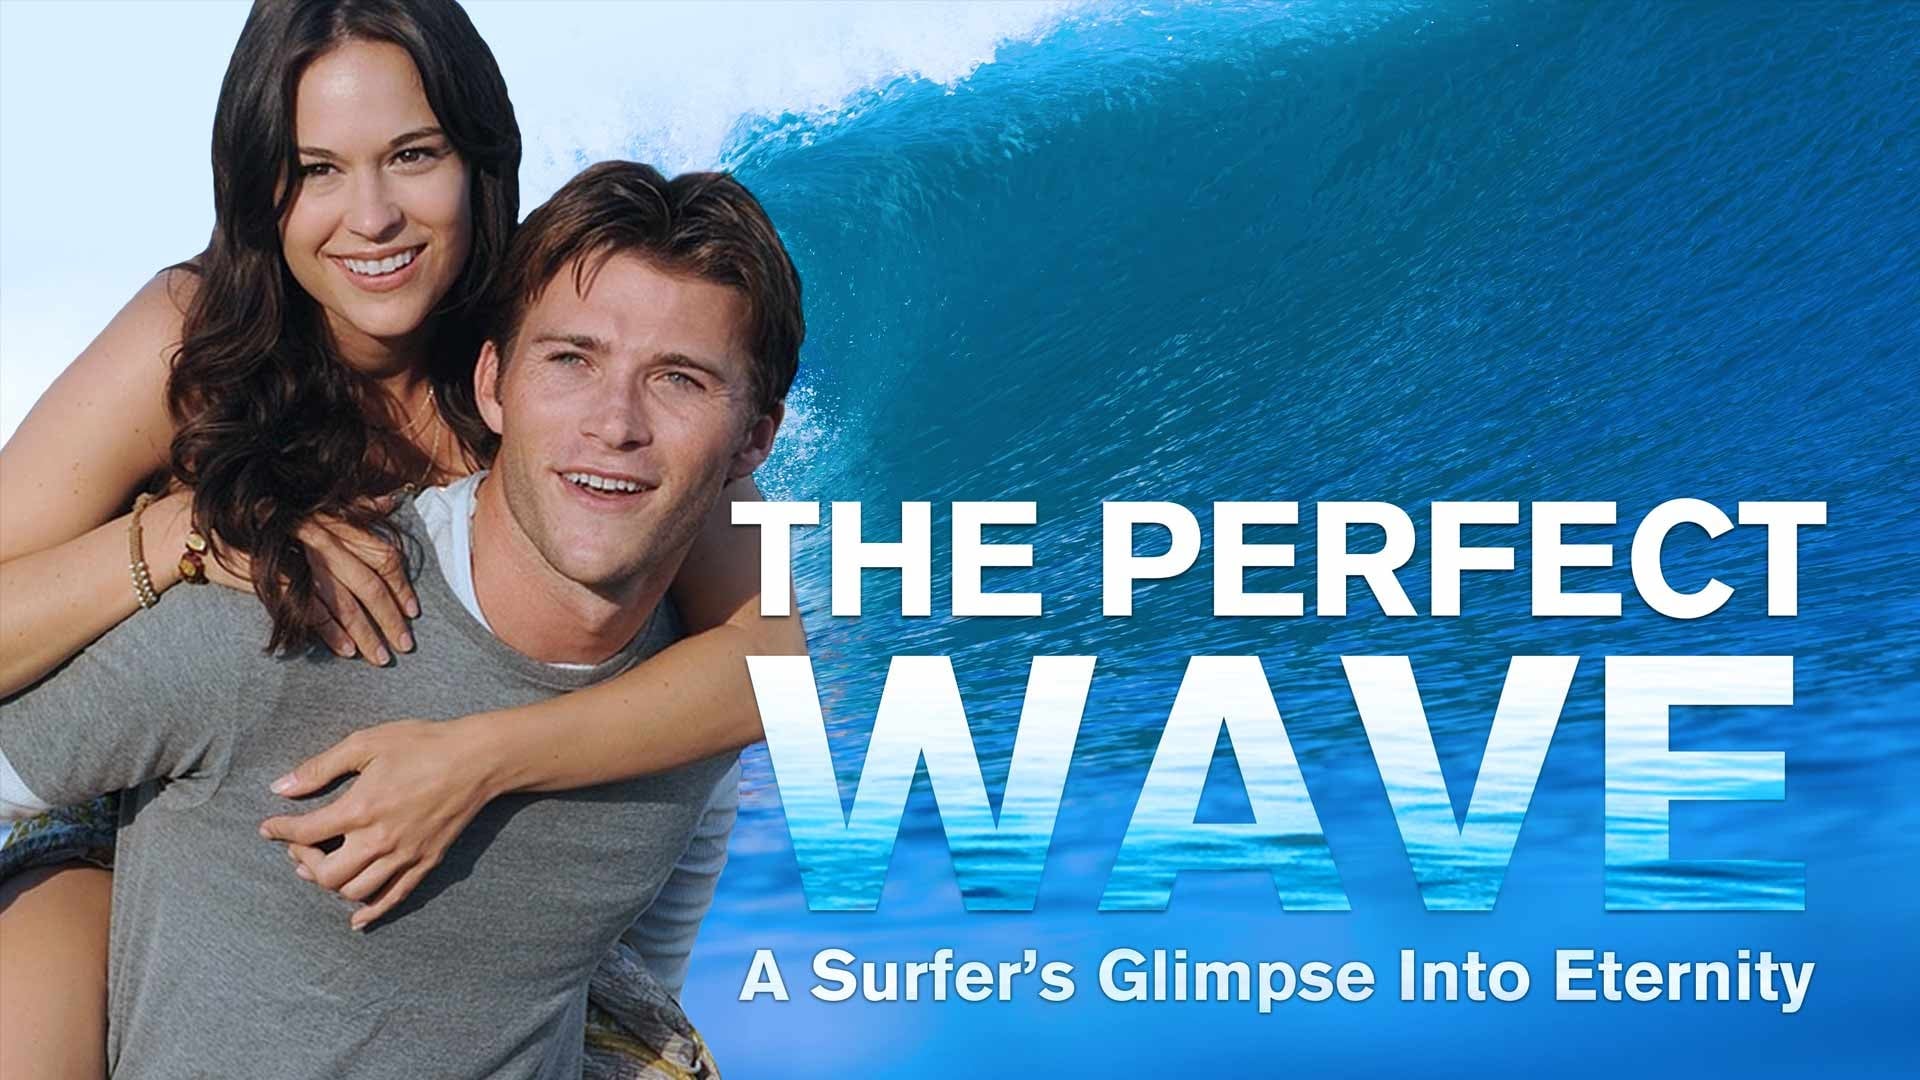 Watch The Perfect Wave (2014) Online Free Full Movie HD 123Movies